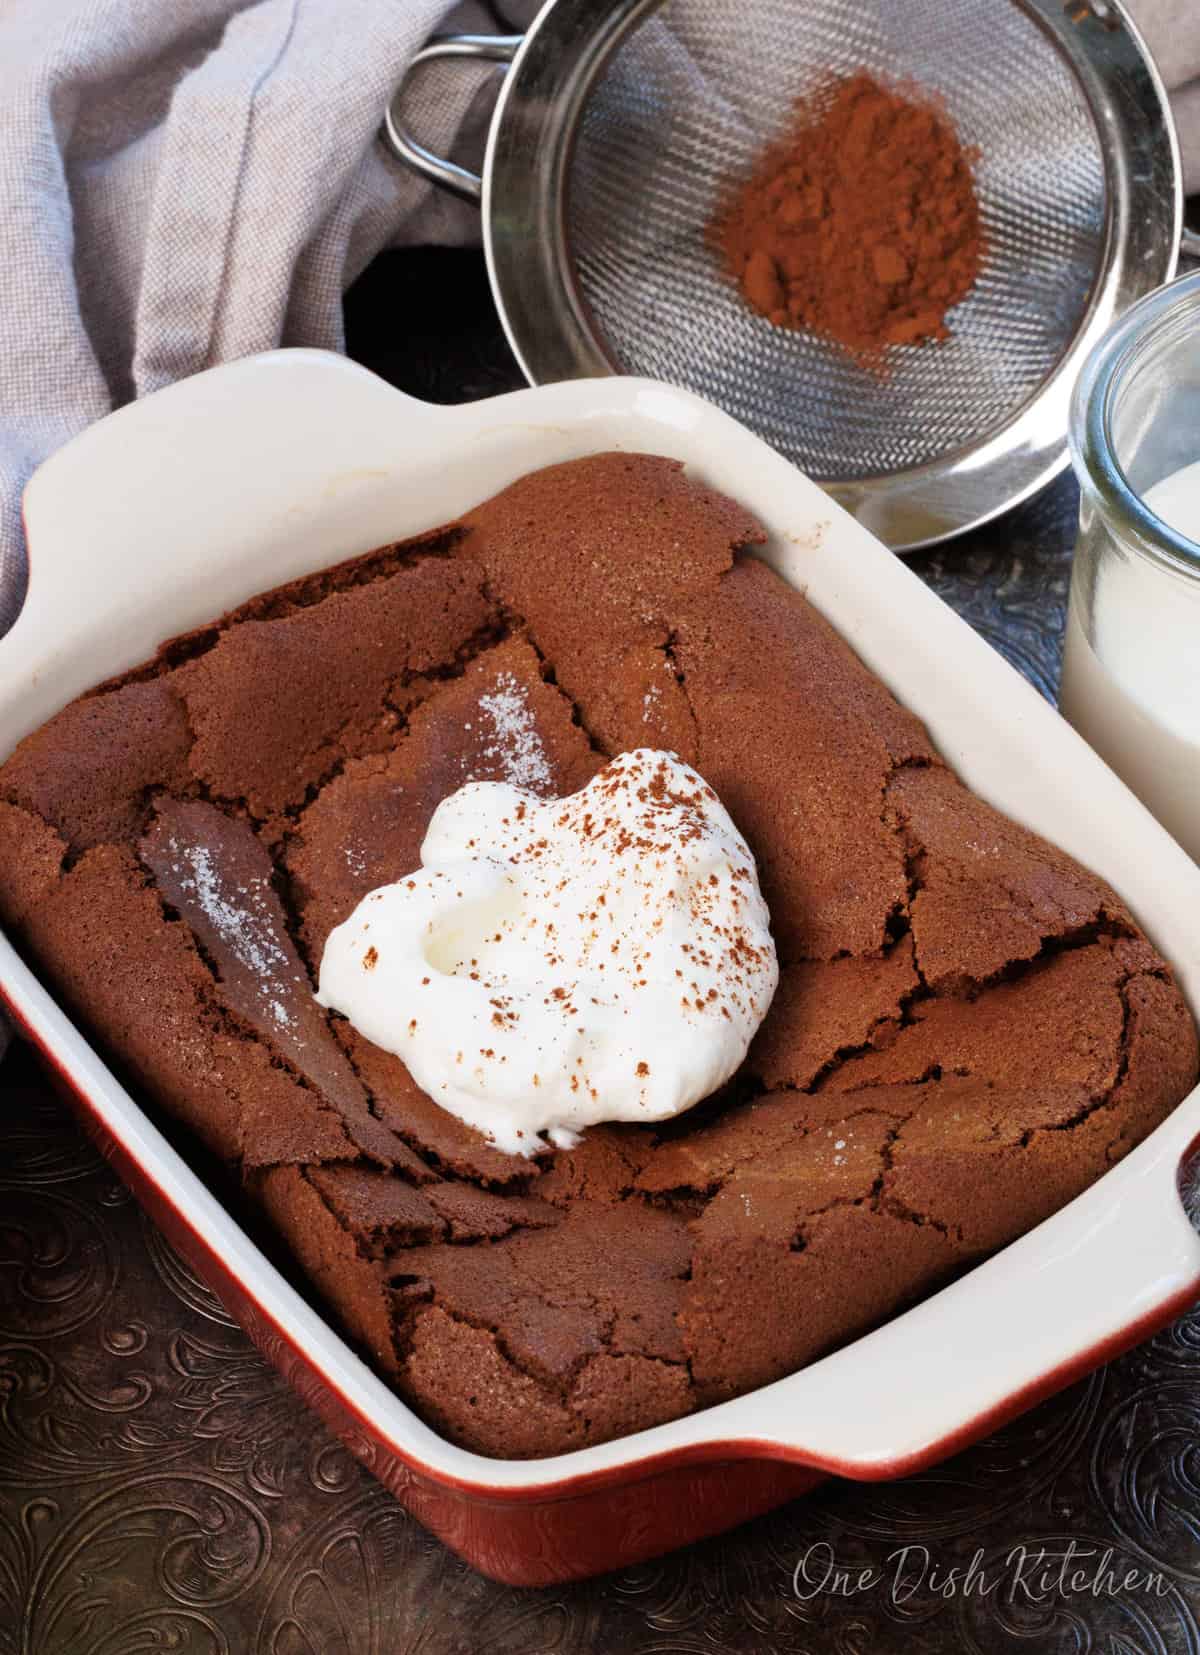 a chocolate flourless cake topped with whipped cream and a dusting of cocoa powder.